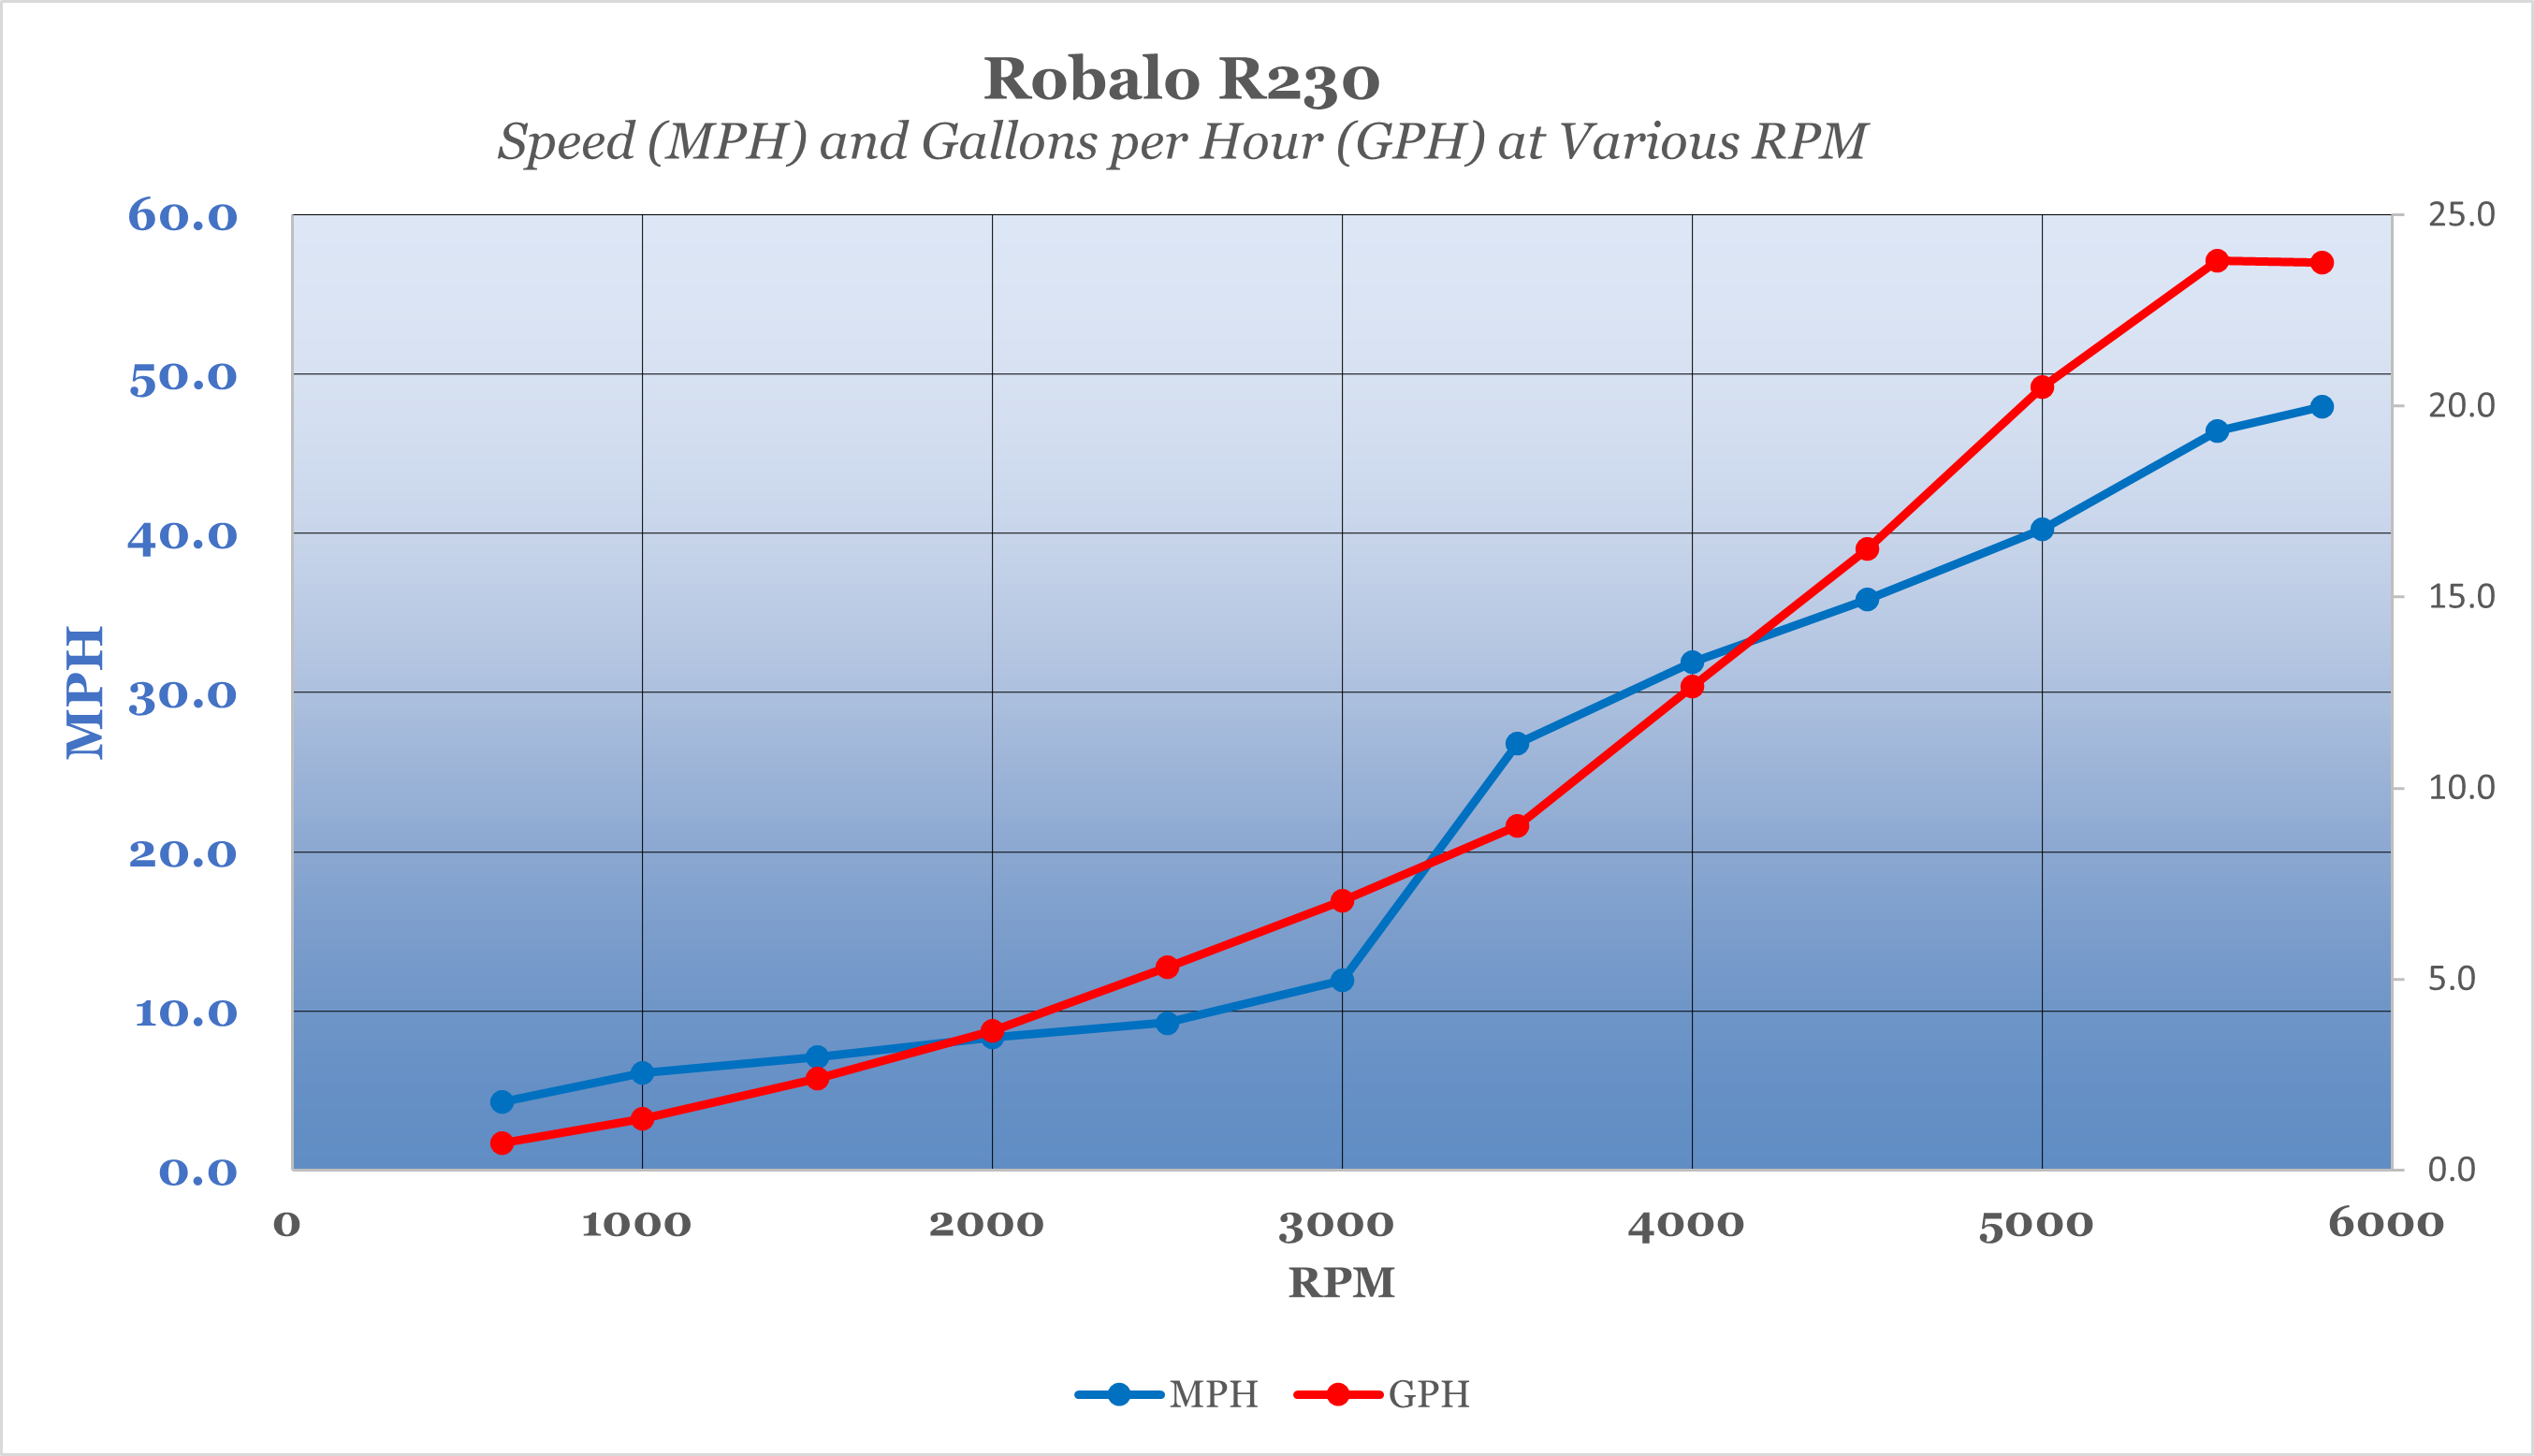 Robalo R230 mph and gph performance chart